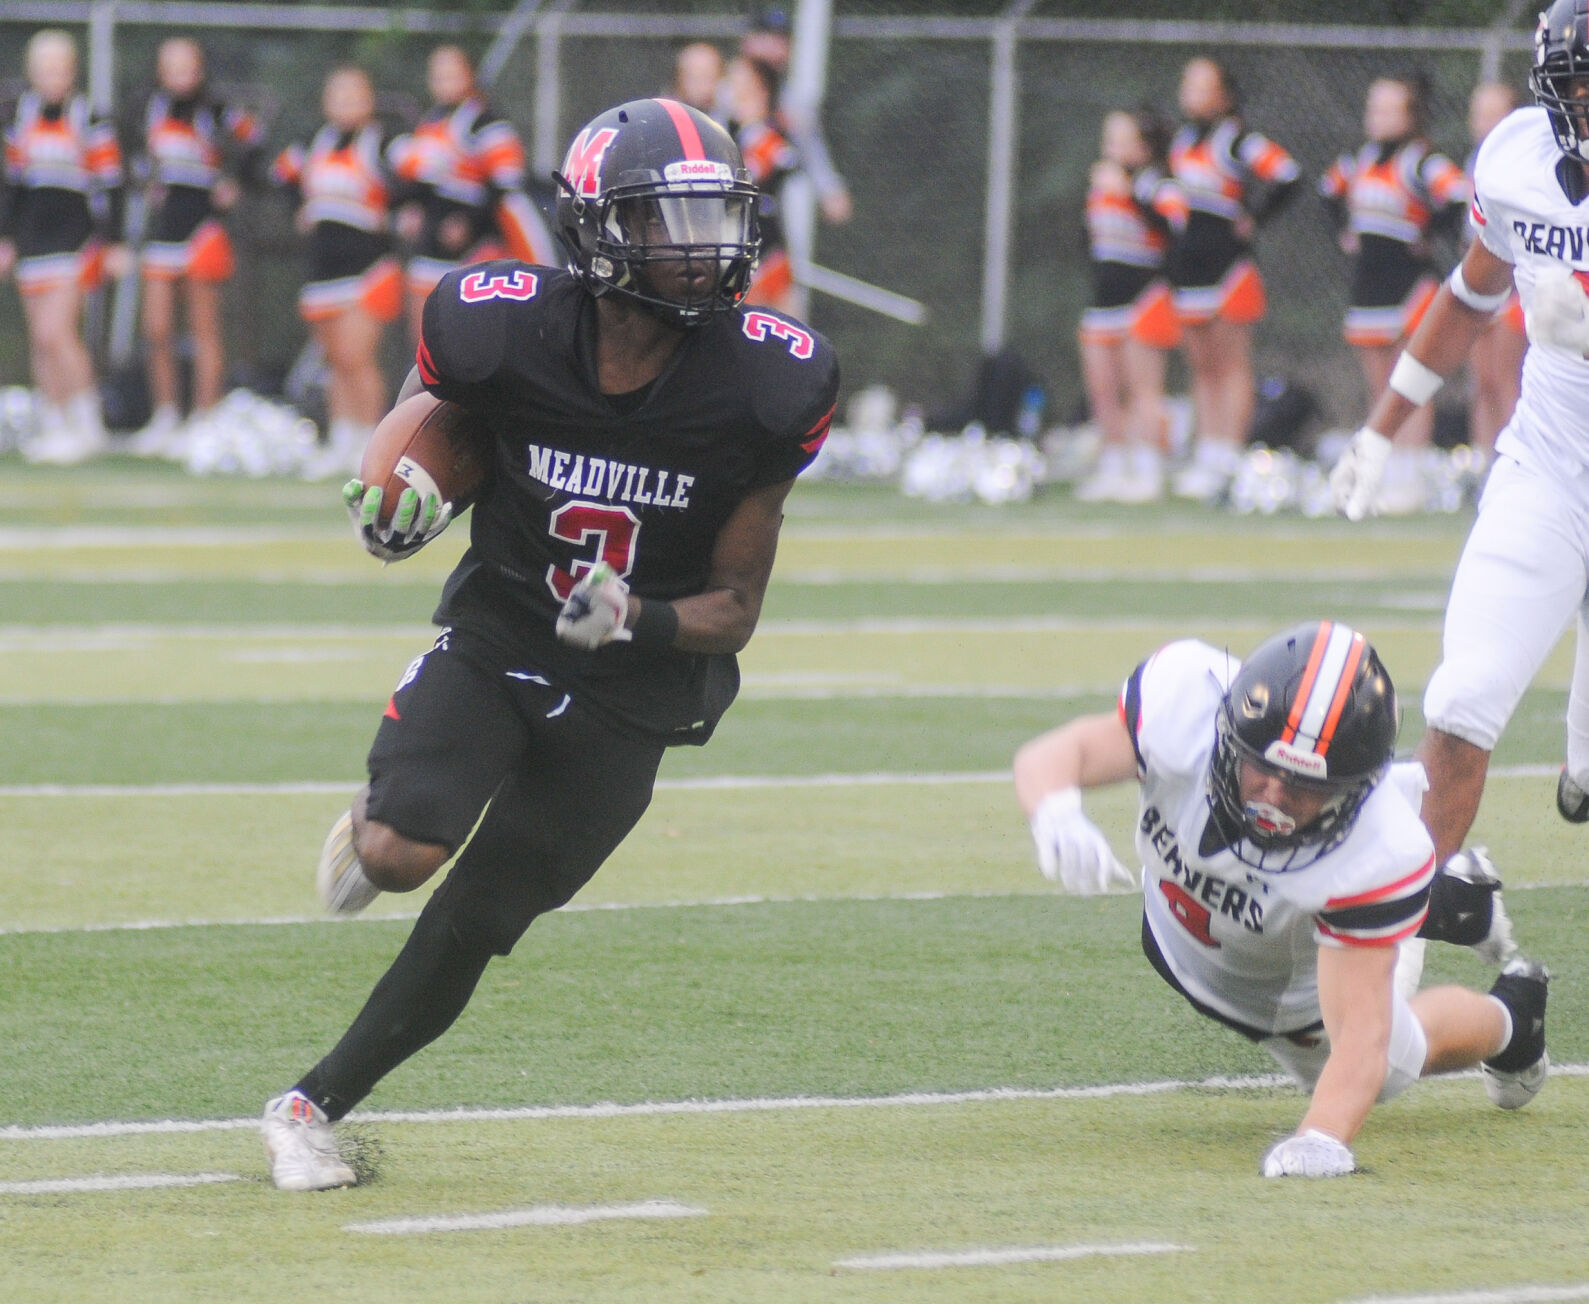 Meadville Bulldogs Look to Bounce Back After Tough Loss to Butler